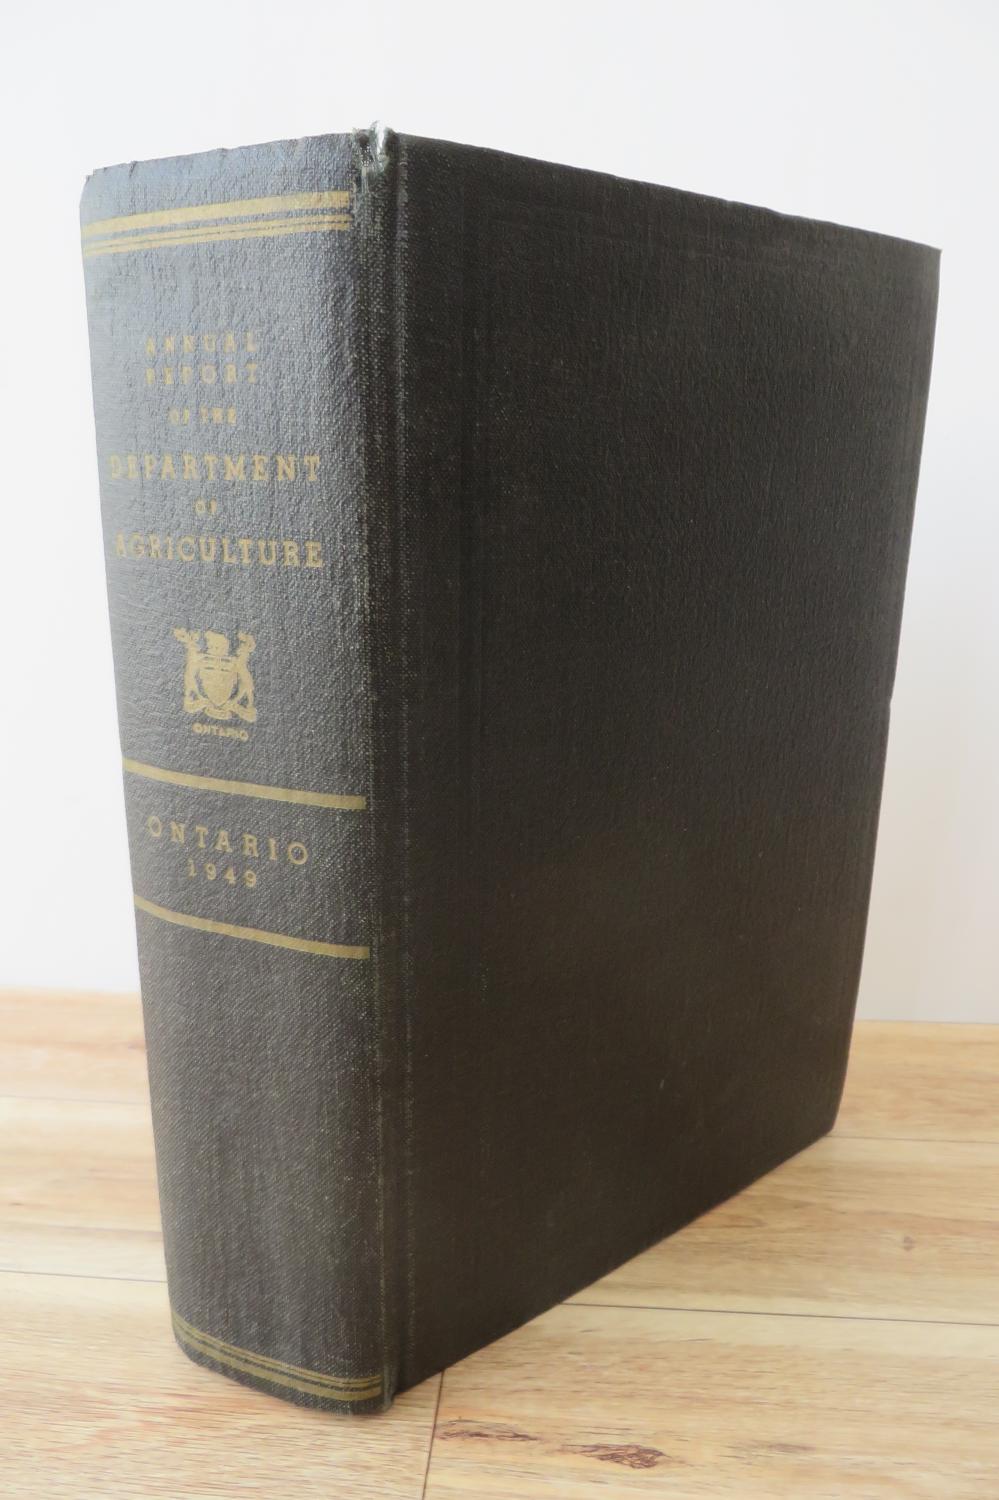 Annual Report of the Department of Agriculture of The Province of Ontario 1949